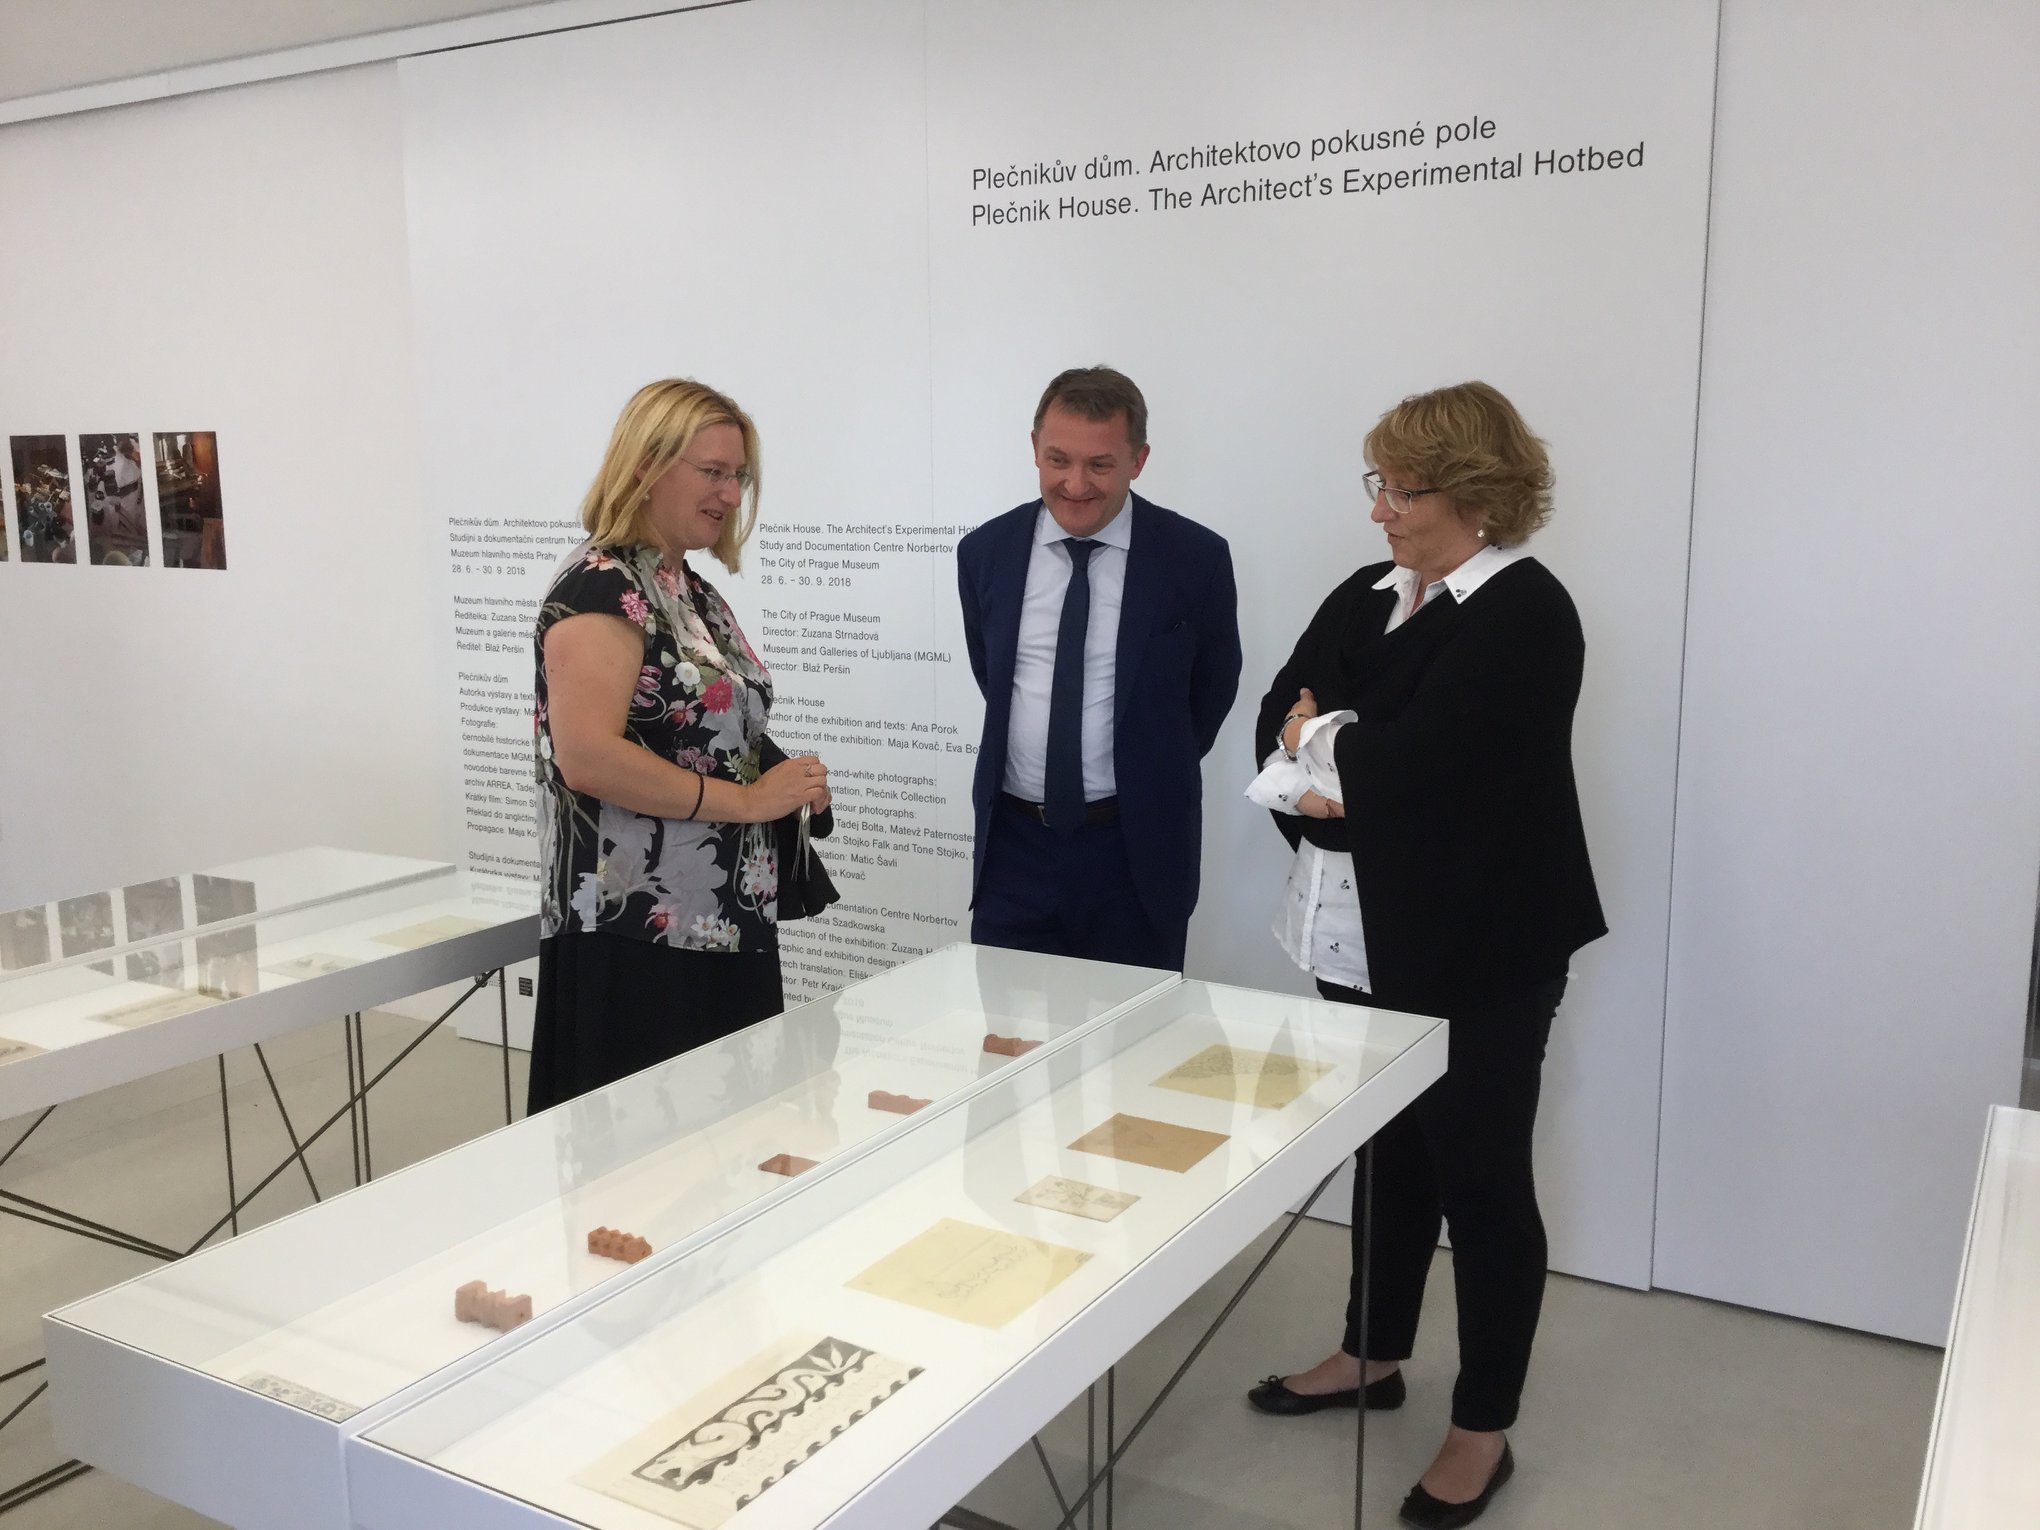 Ana Porok, curator, Leon Marc, Slovenian ambassador, and Irena Vesel, conservator, at the exhibition opening in the Norbertov Centre